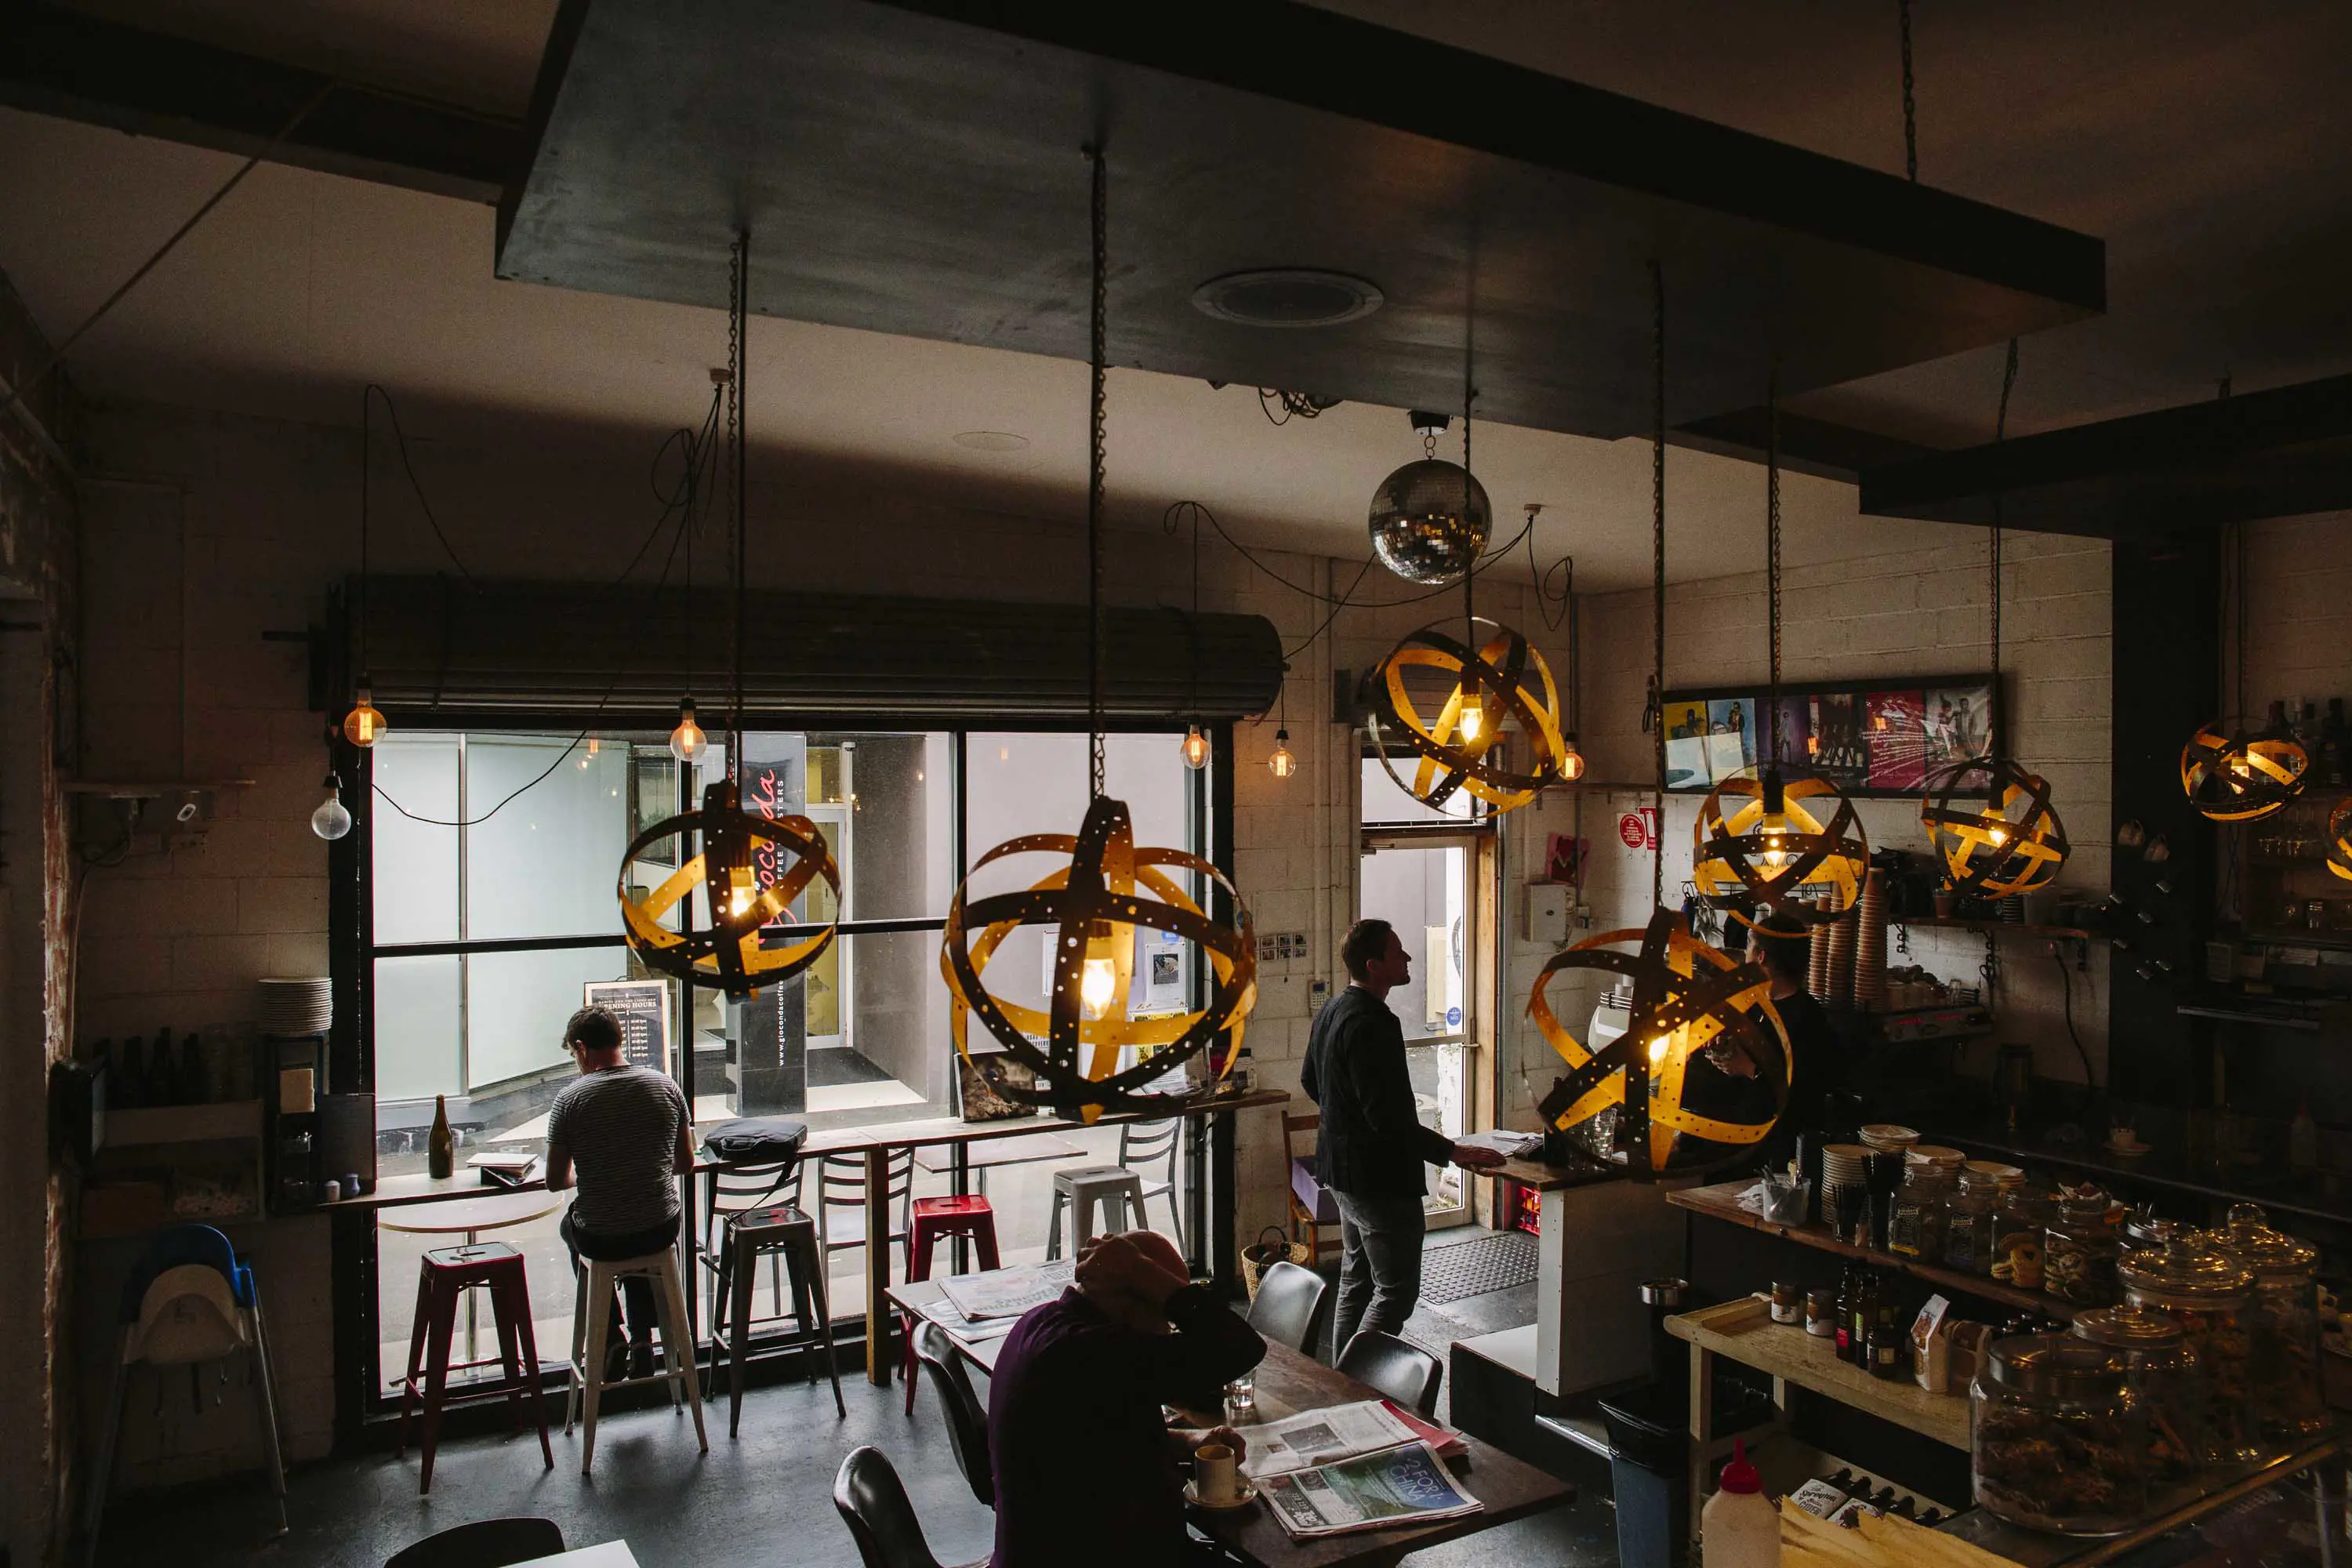 People sit inside the tall windows of a cafe, decorated with large circular lights, hung from the ceiling.